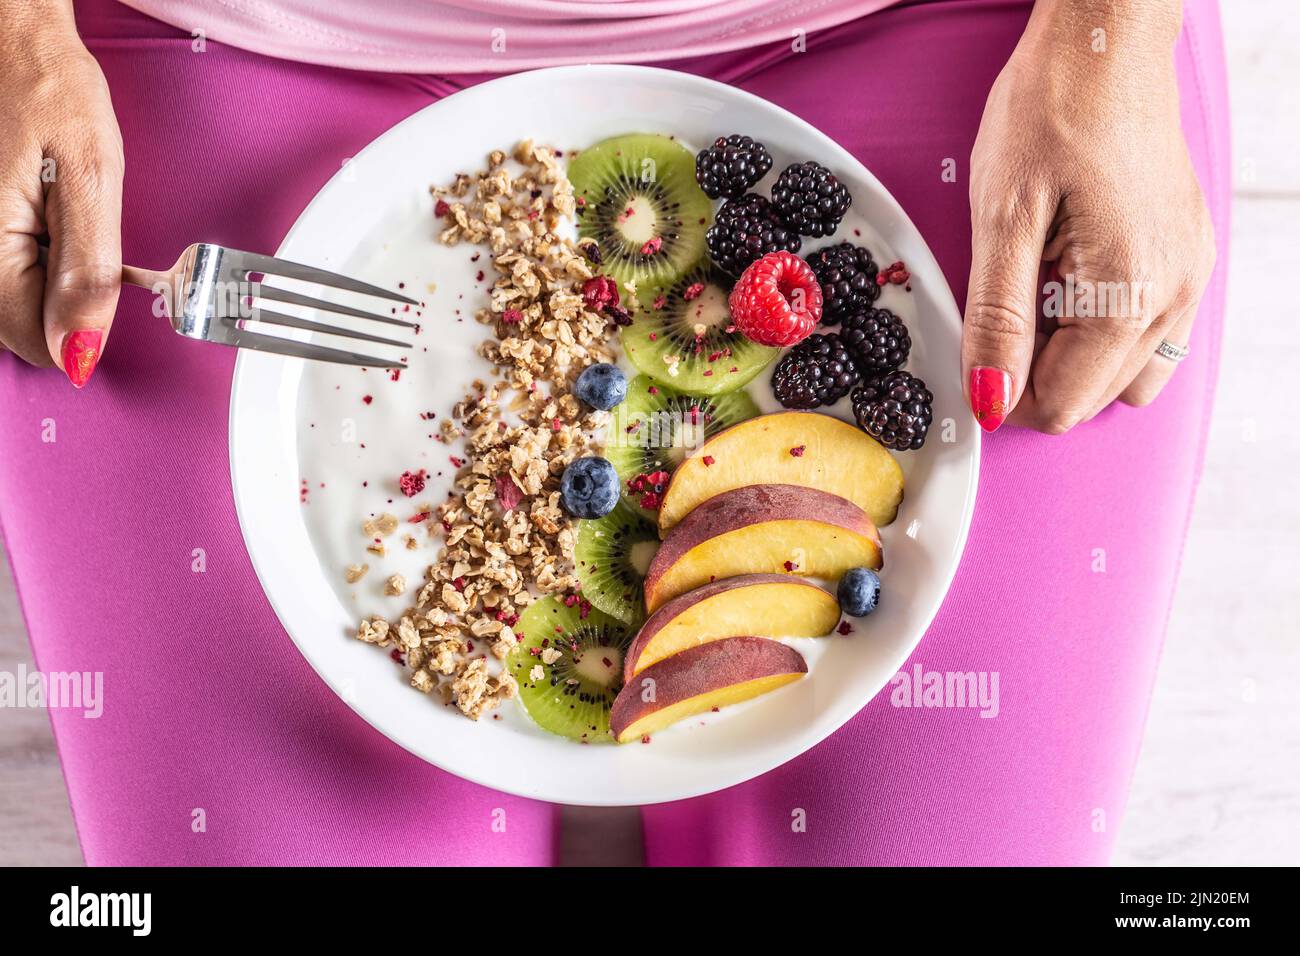 A woman has a healthy breakfast after morning exercise. Yogurt, blackberry muesli, raspberries, blueberries, kiwi and peaches in a white bowl. Stock Photo